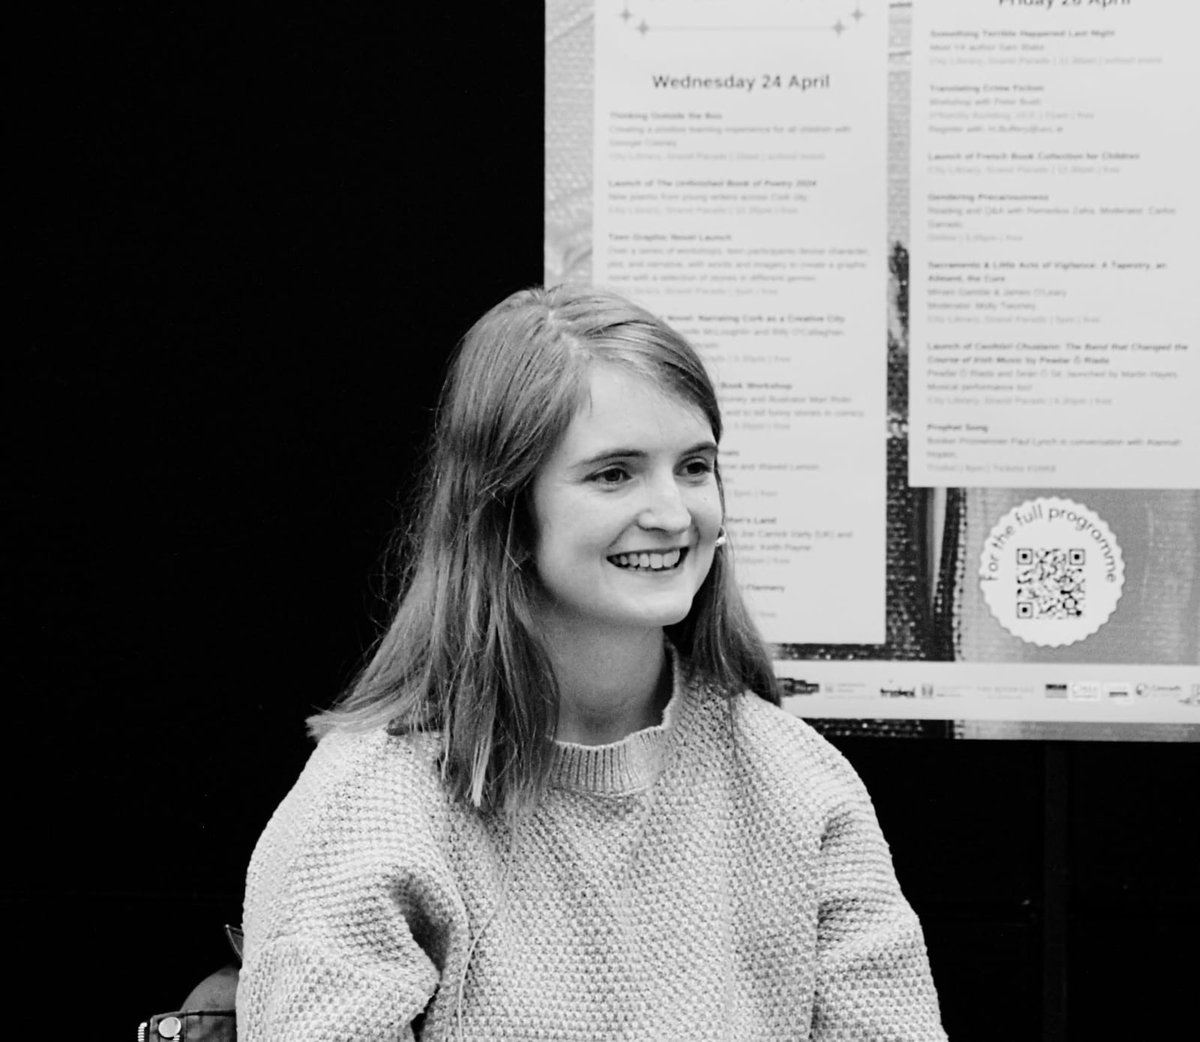 I’ll never forget the lad who pointed to my headshot & then pointed at me & said it didn’t look like me at all (fair enough). But his mind will surely explode when he sees this B & W one and then me in person in all my colours 💅 📸: taken by the lovely John Breen @WorldBookFest